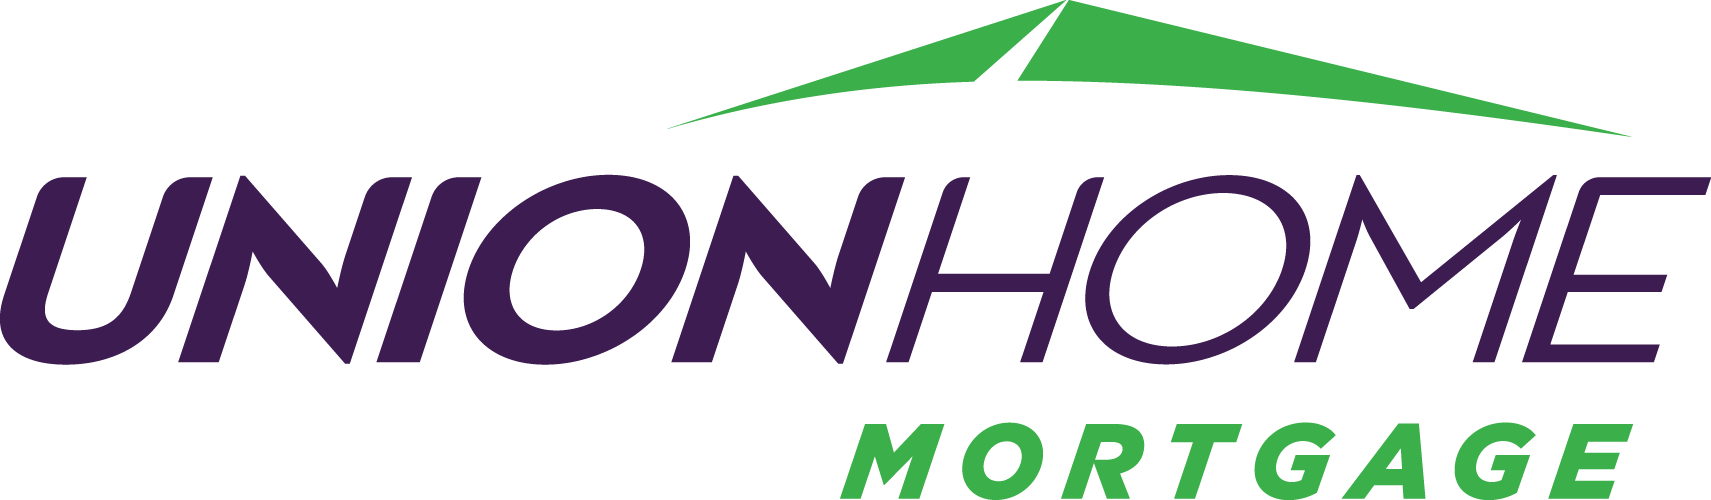 Union Home Mortgage Sweepstakes